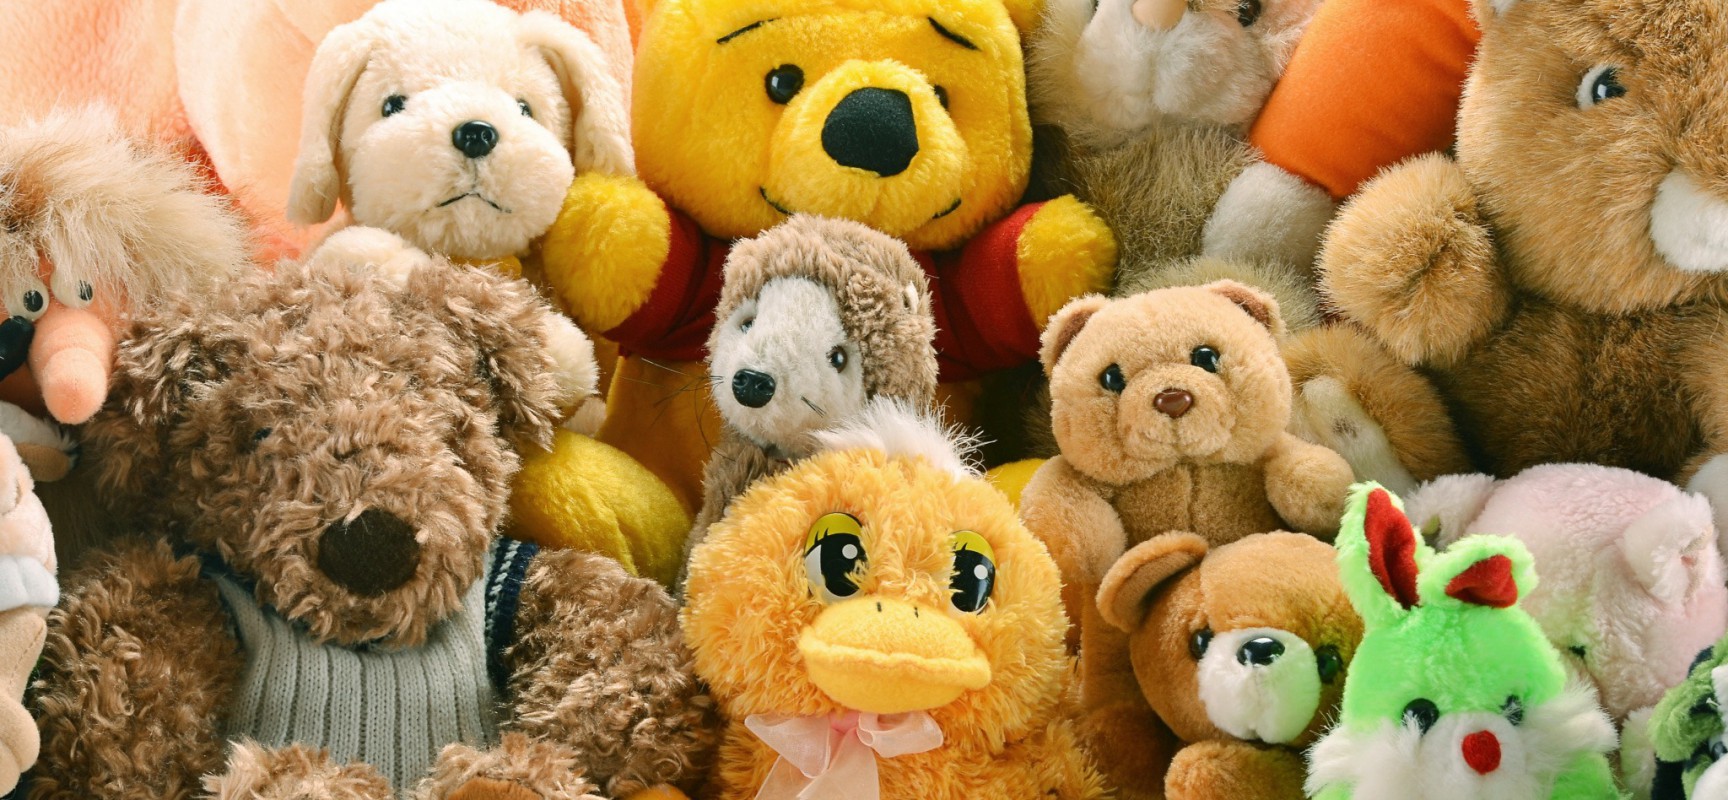 How to Clean Your Stuffed Animals | Budsies Custom Gifts Blog